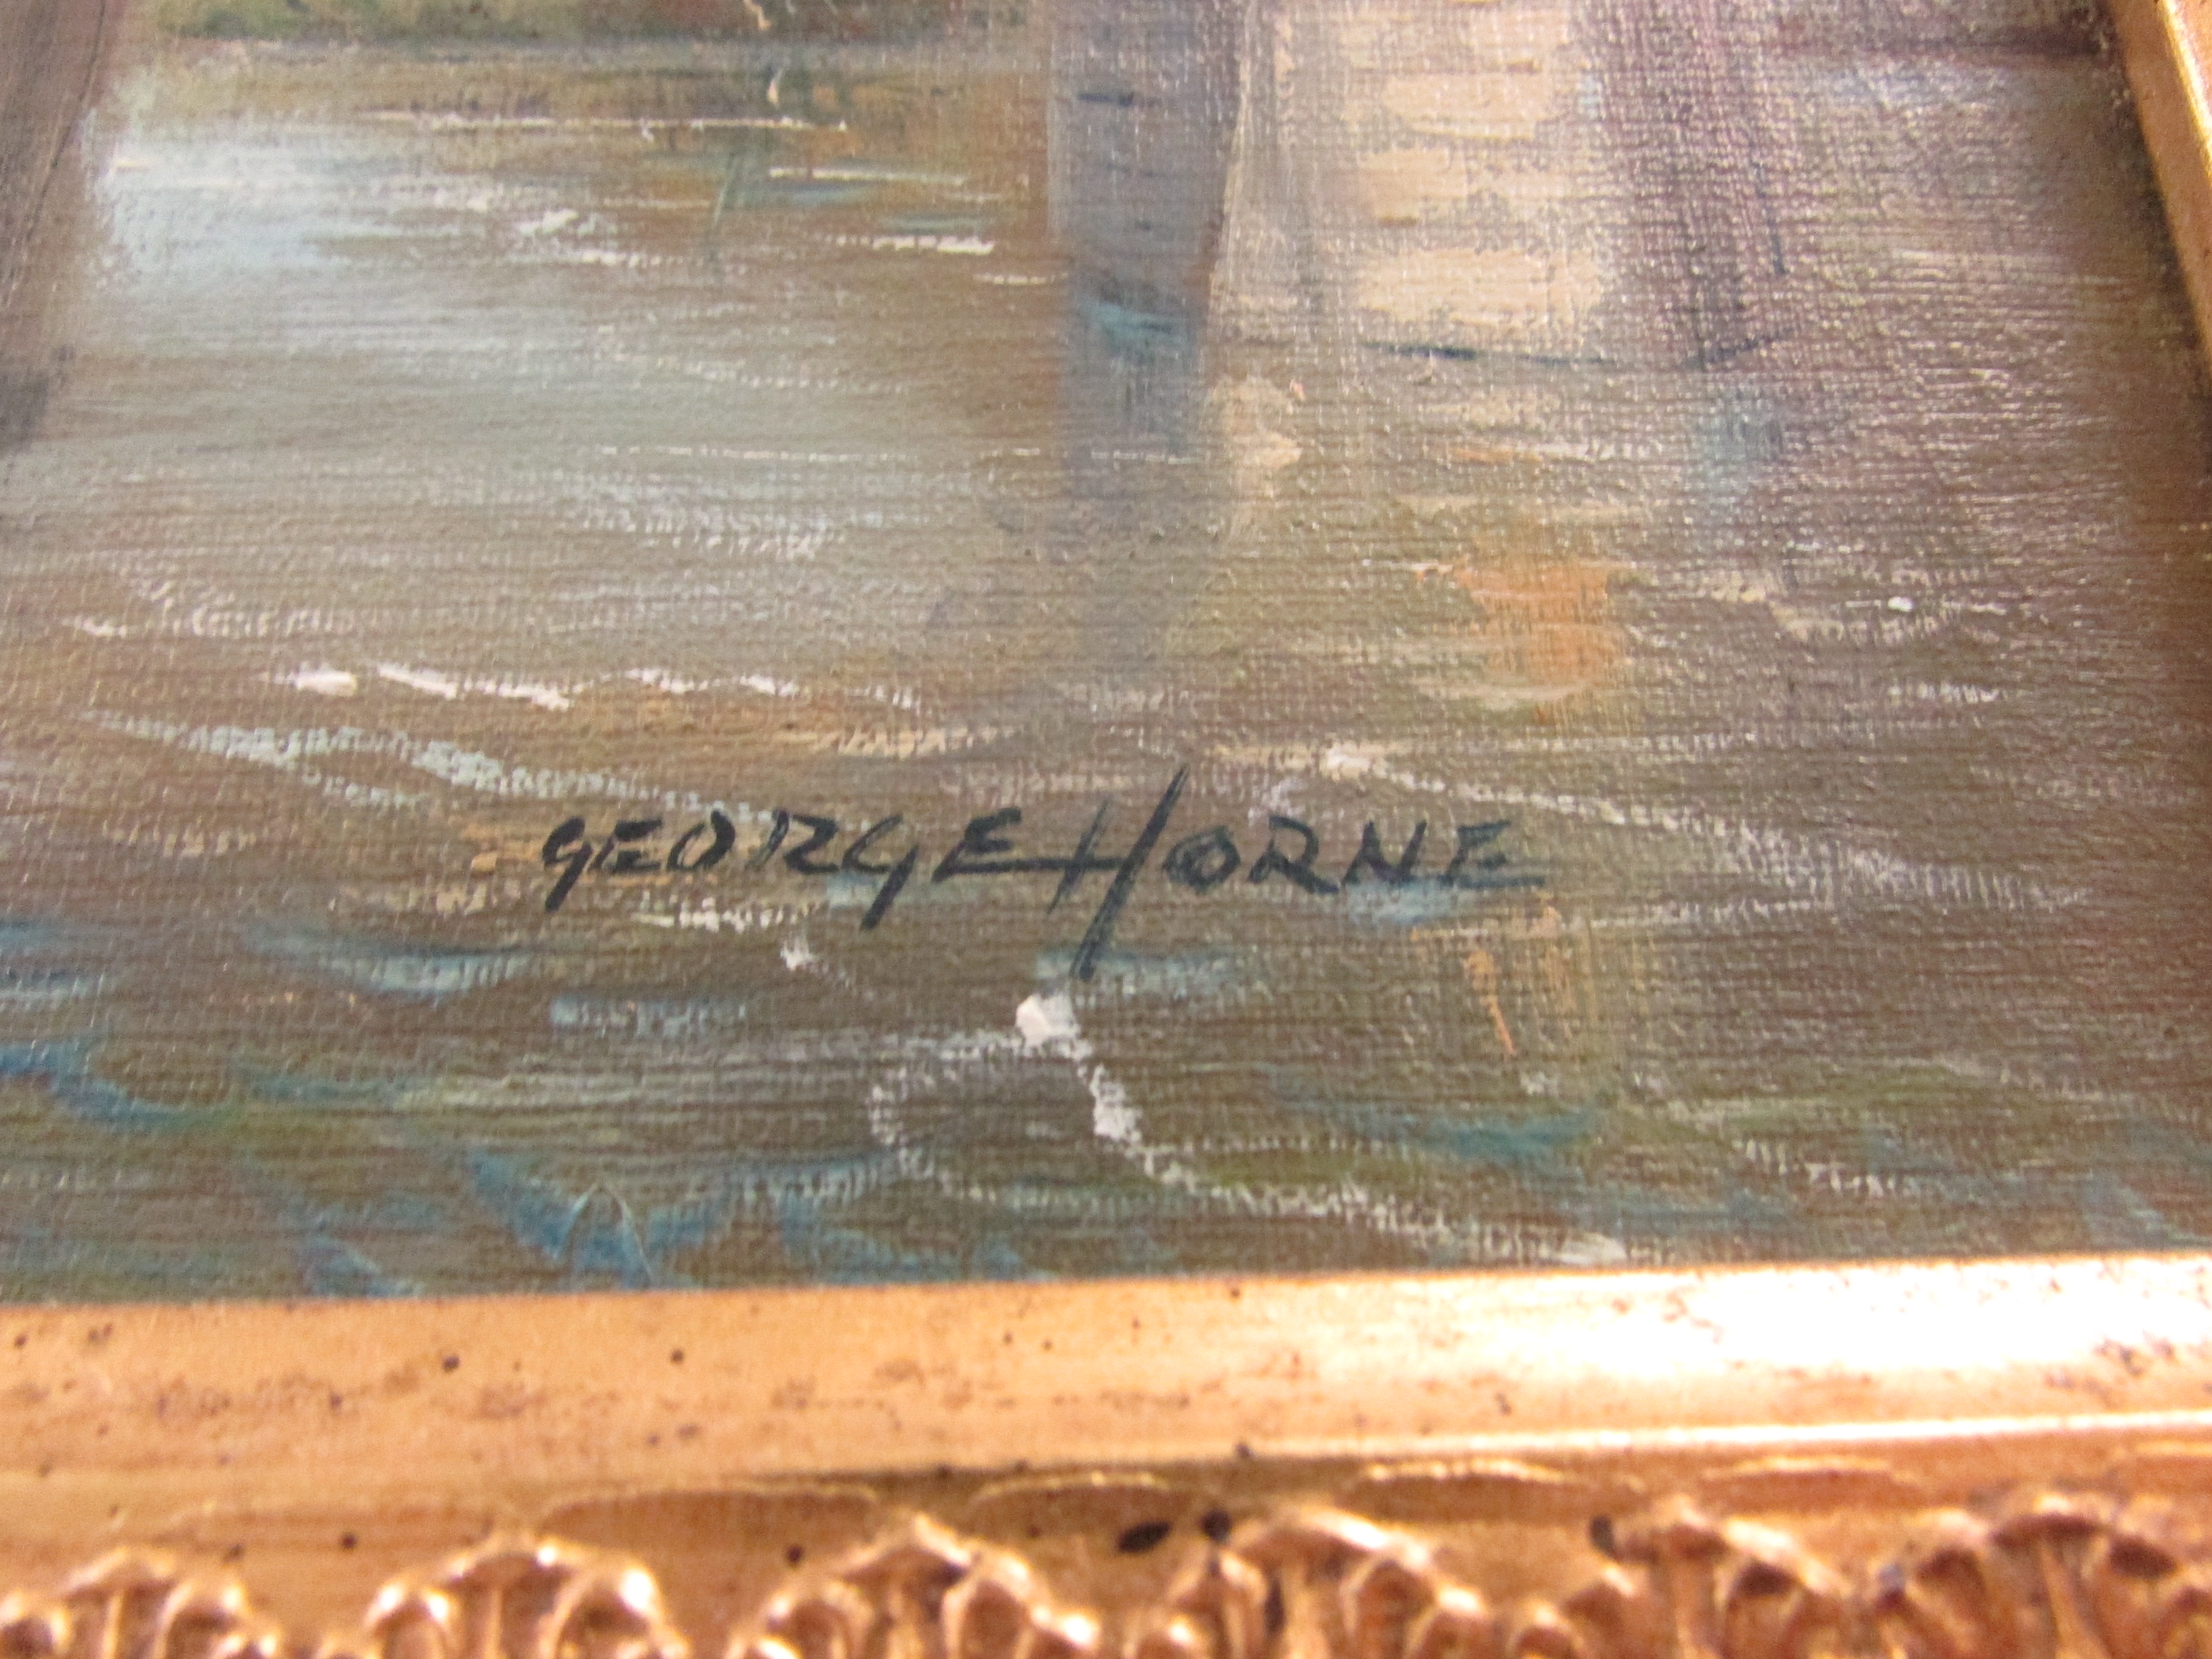 AN ACRYLIC ON BOARD TITLED 'GREYSTONES BRIDGE' SIGNED GEORGE HORNE, LOWER RIGHT. - Image 4 of 4